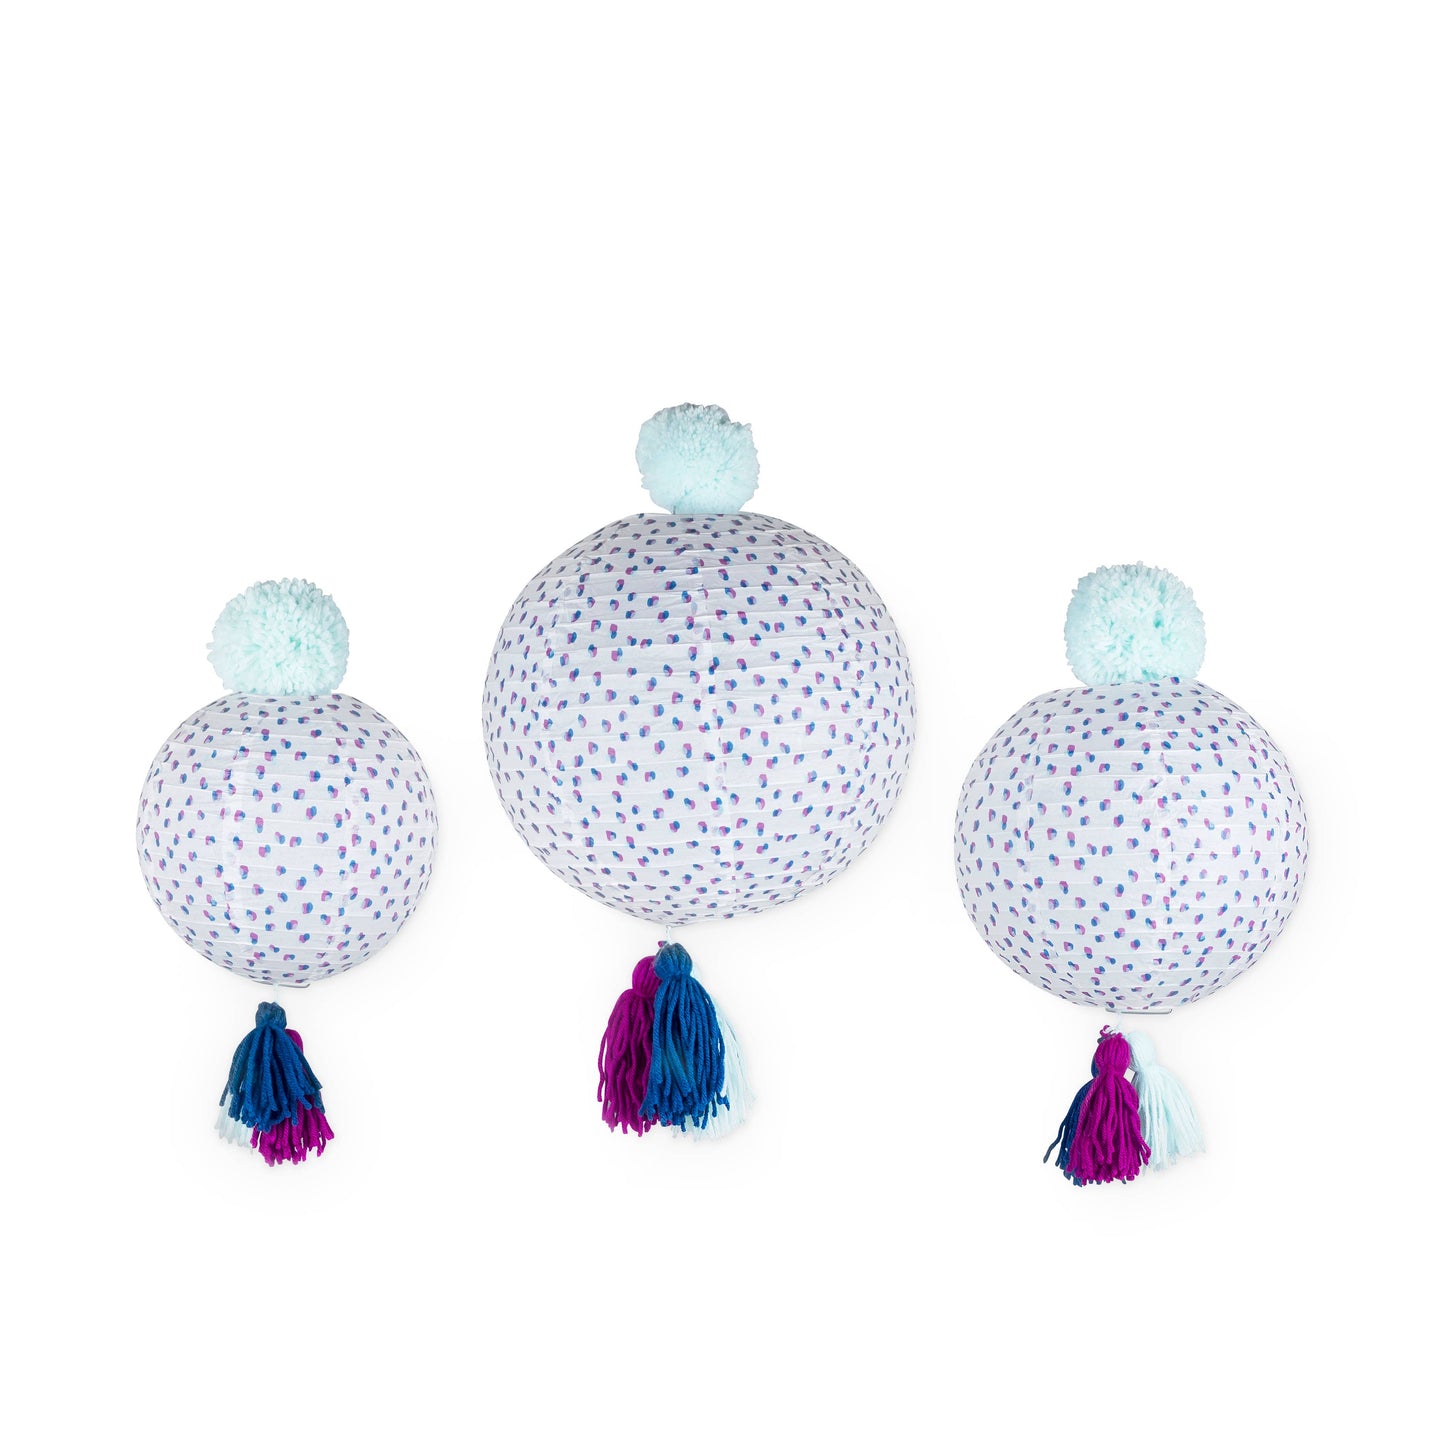 Paper Lanterns with Poms and Tassels by Cakewalk